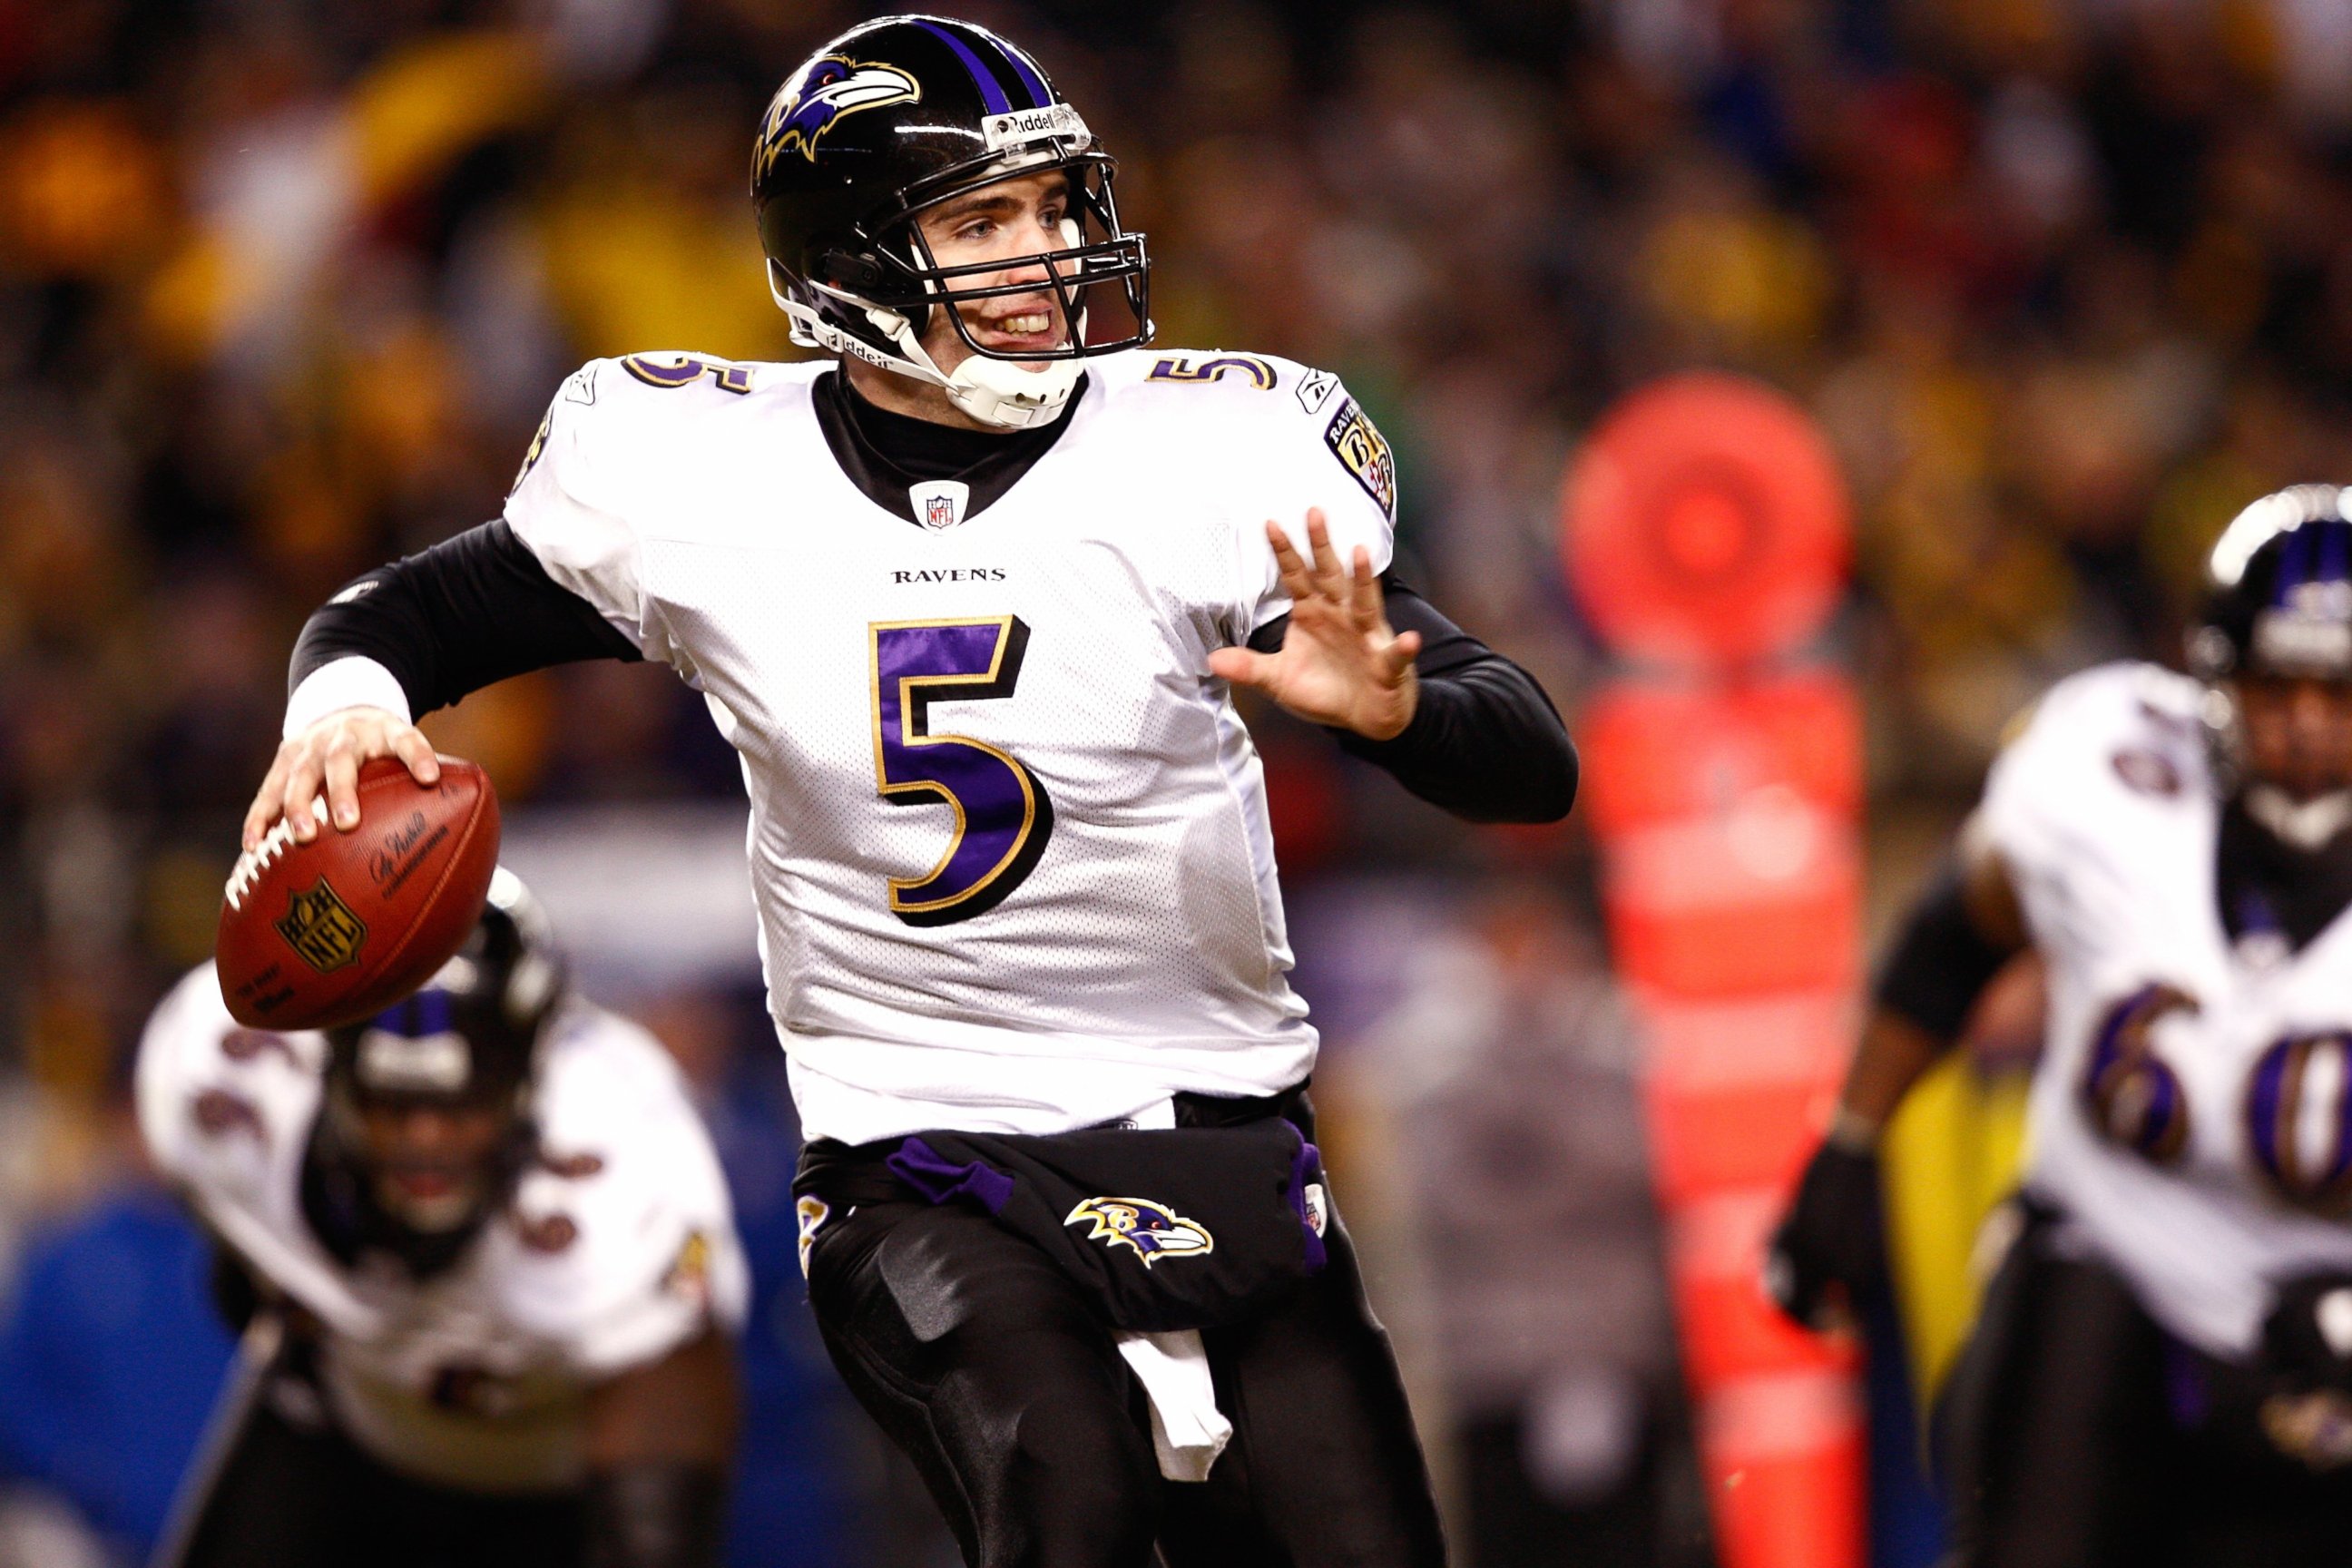 PHOTO: Joe Flacco #5 of the Baltimore Ravens looks to pass the football against the Pittsburgh Steelers during the AFC Championship game at Heinz Field on Jan. 18, 2009 in Pittsburgh, Pennsylvania. The Steelers won 23-14 to advance to Super Bowl XLIII.